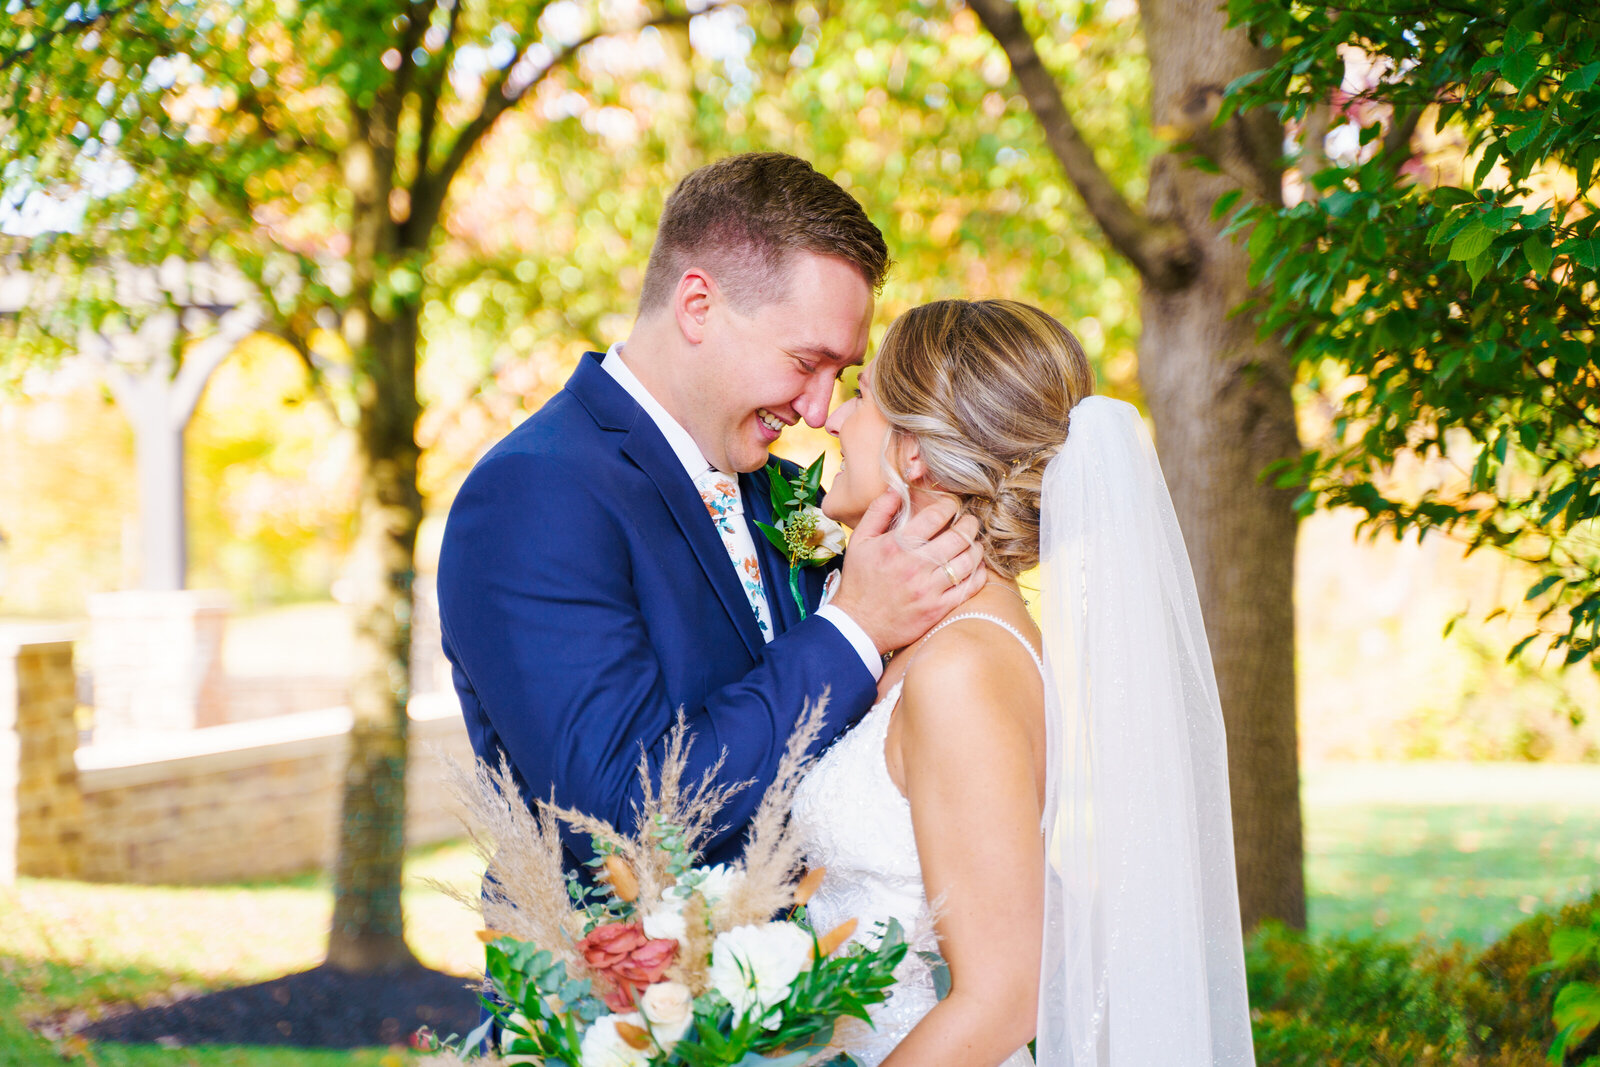 Bride and groom touch foreheads and smile at each other in front of fall foliage at Pinnacle Golf Course in Grove City, Ohio.